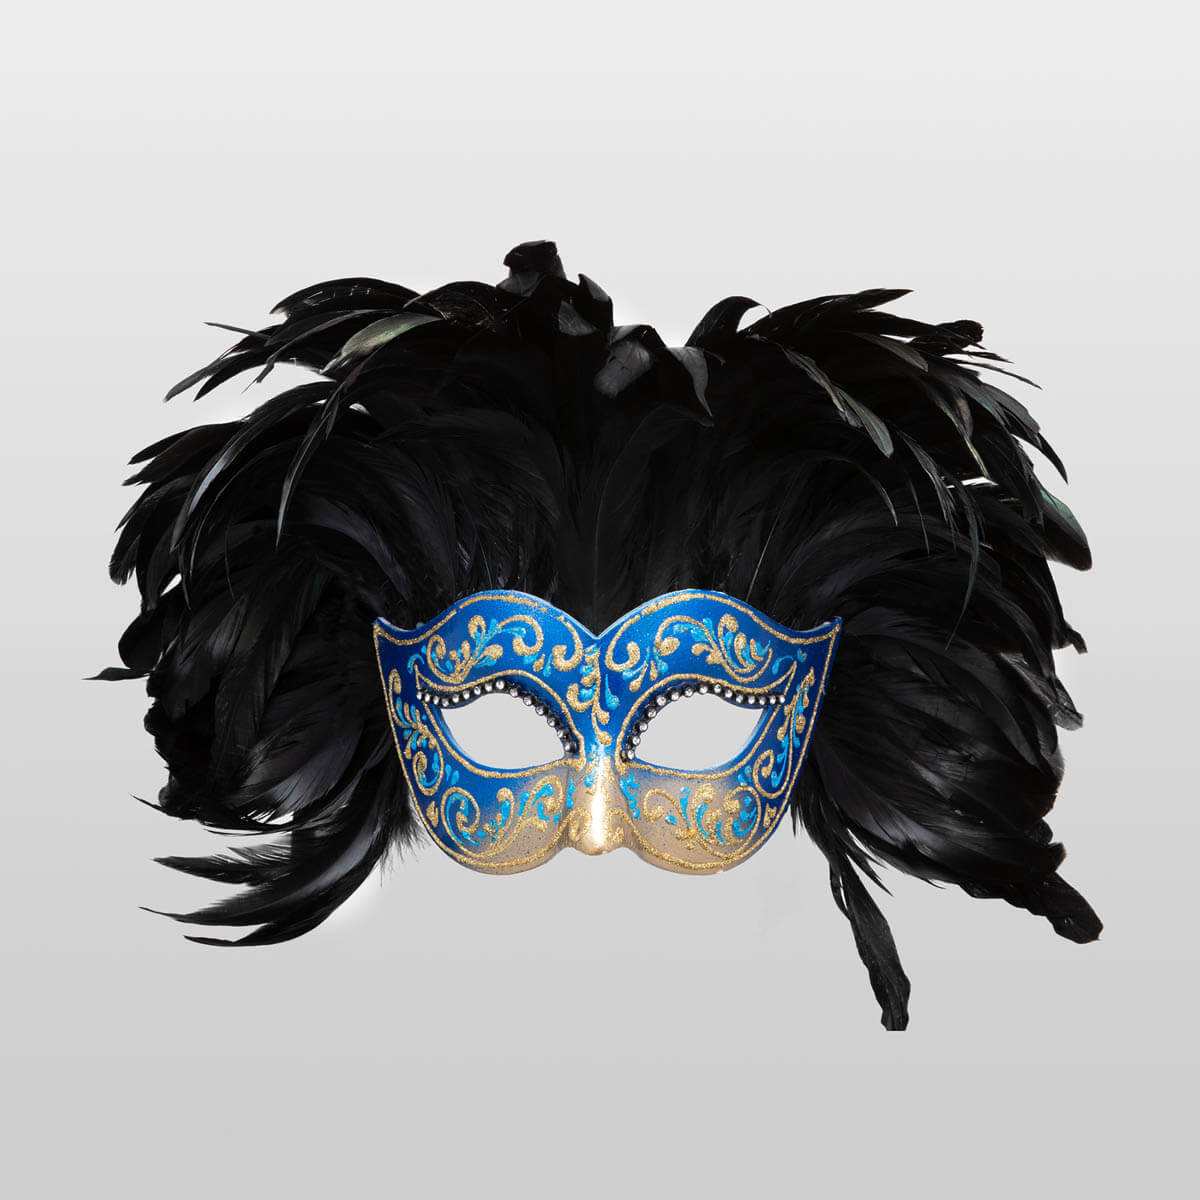 History of the Carnival in Venice Masks and characters